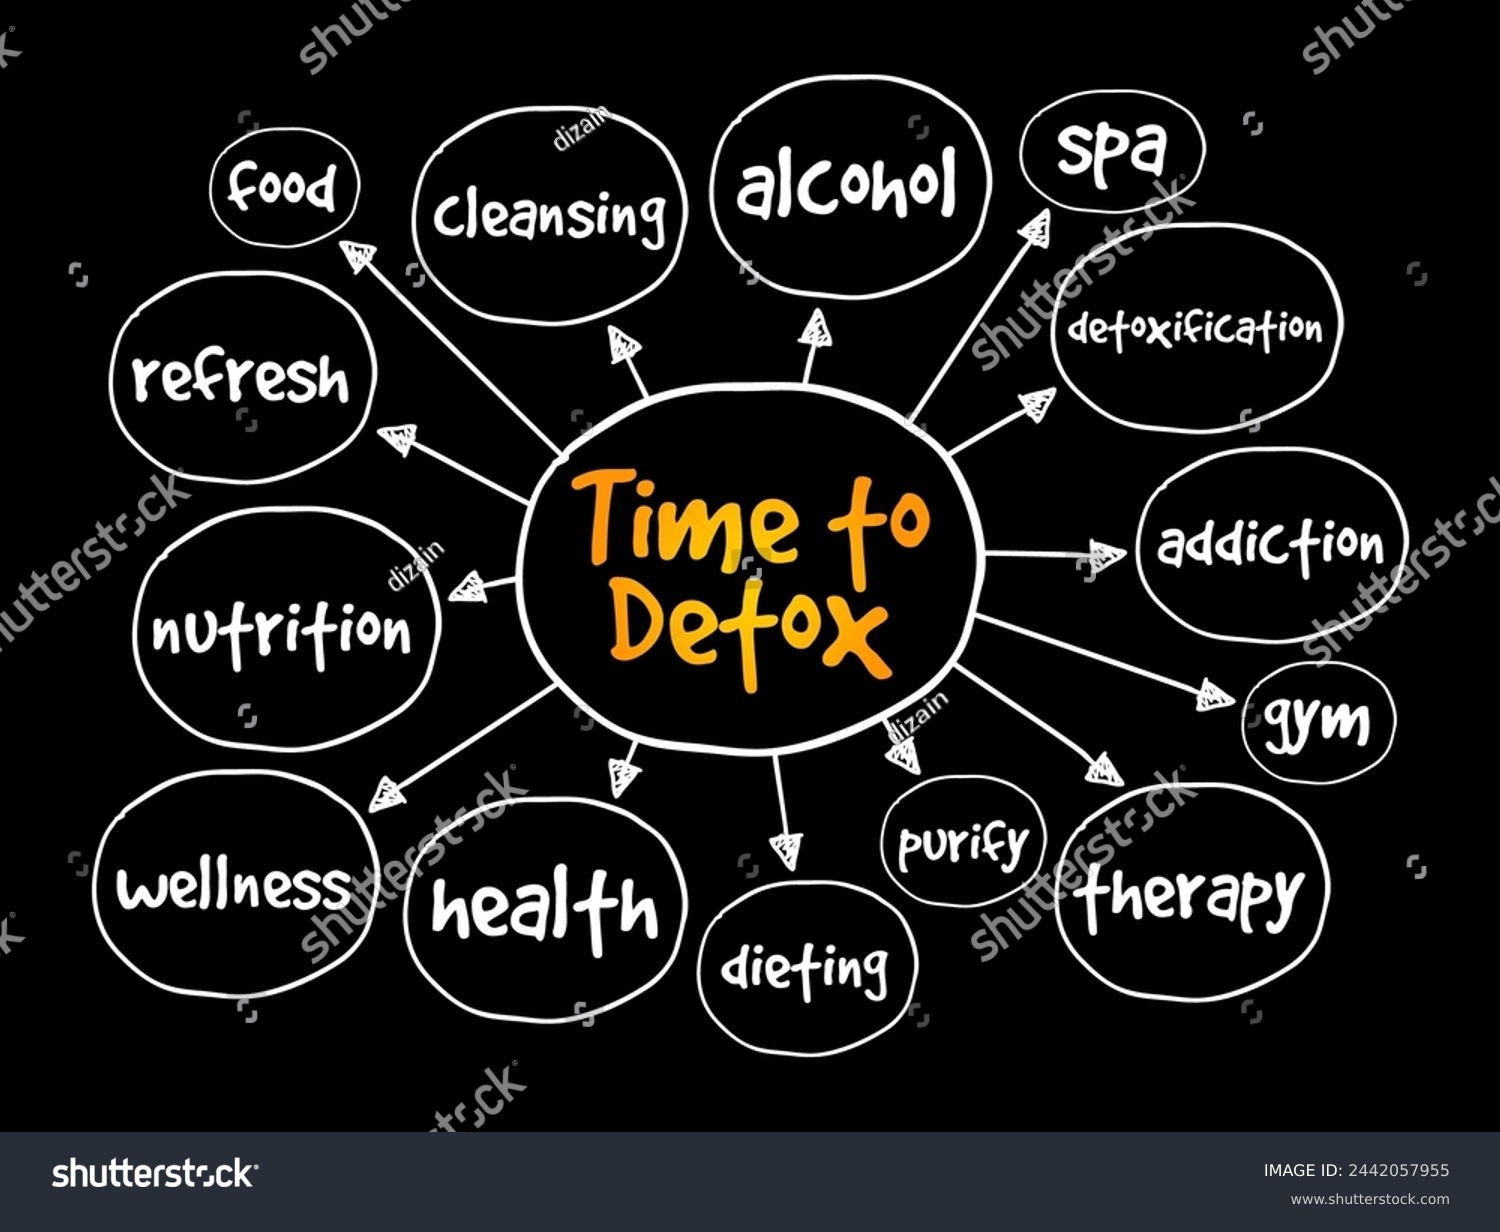 SVG of Time to Detox - period or moment when someone decides to undergo a process of detoxification, mind map text concept background svg